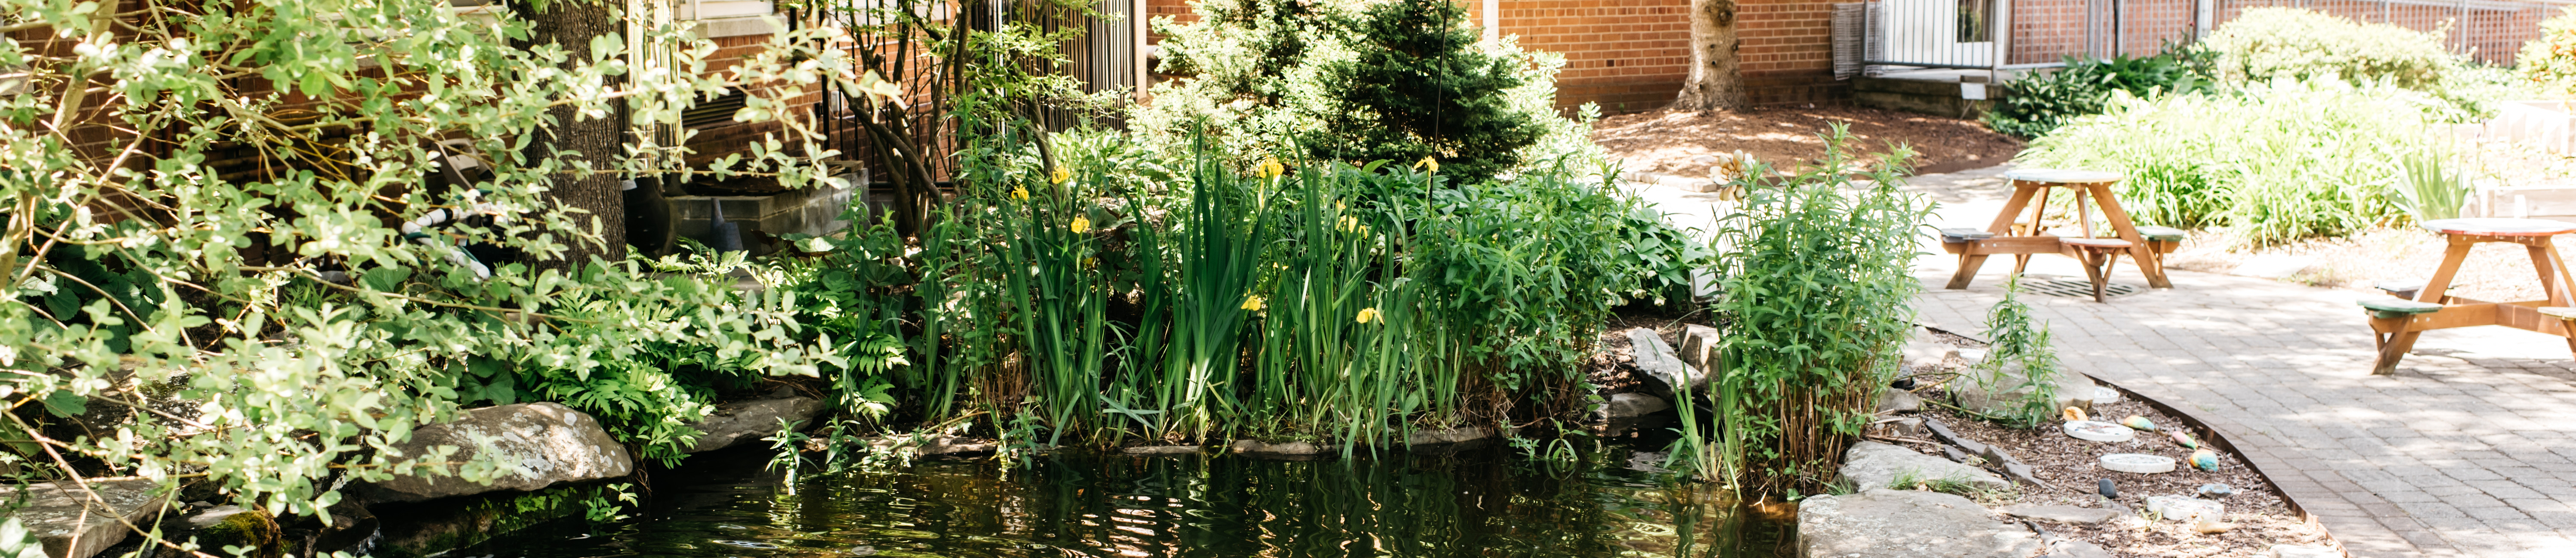 Tisdale Courtyard - flowers and a small pond